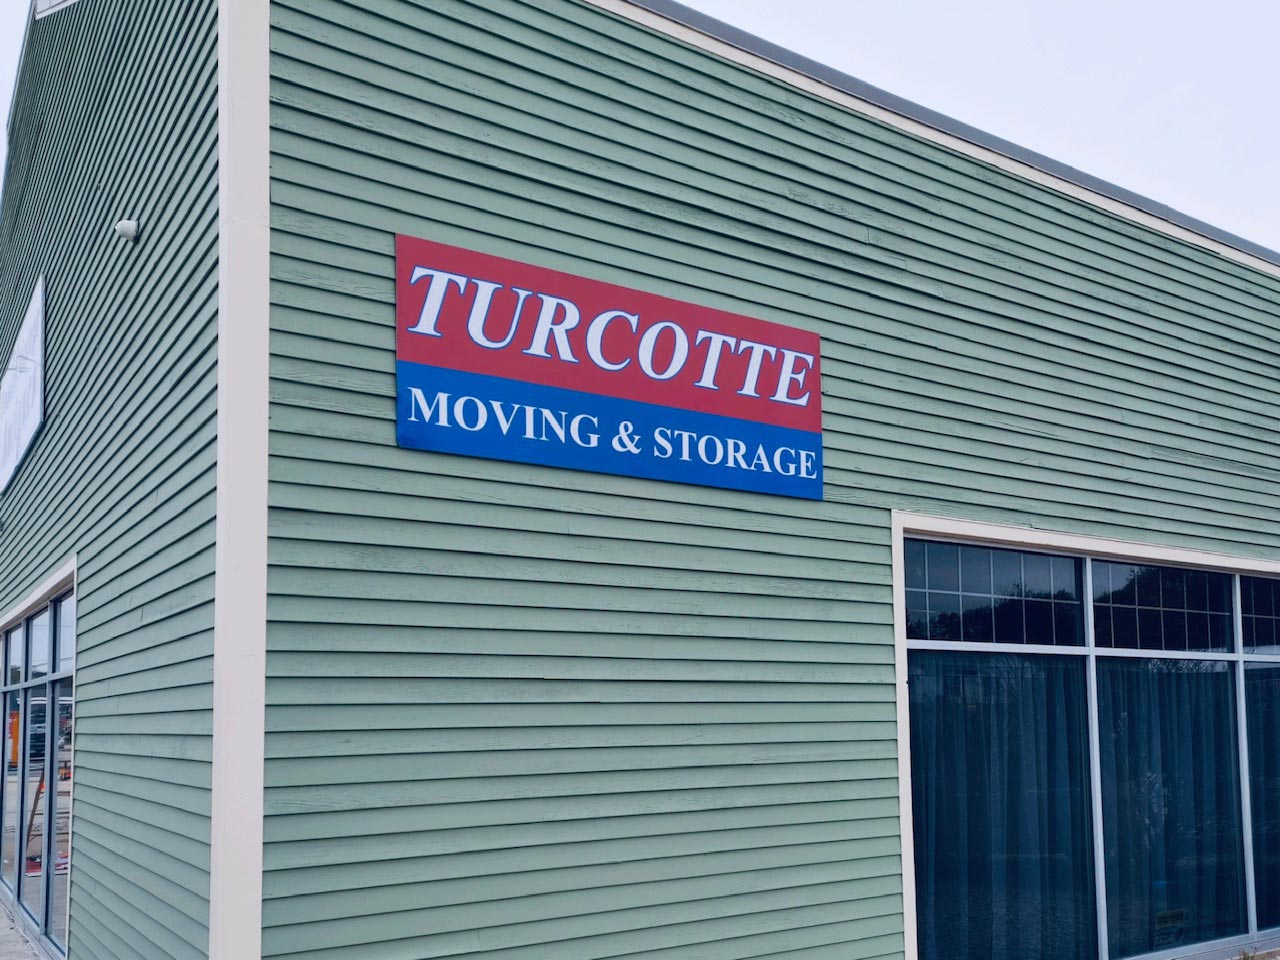 turcotte moving exterior sign - professional movers hampton new hampshire